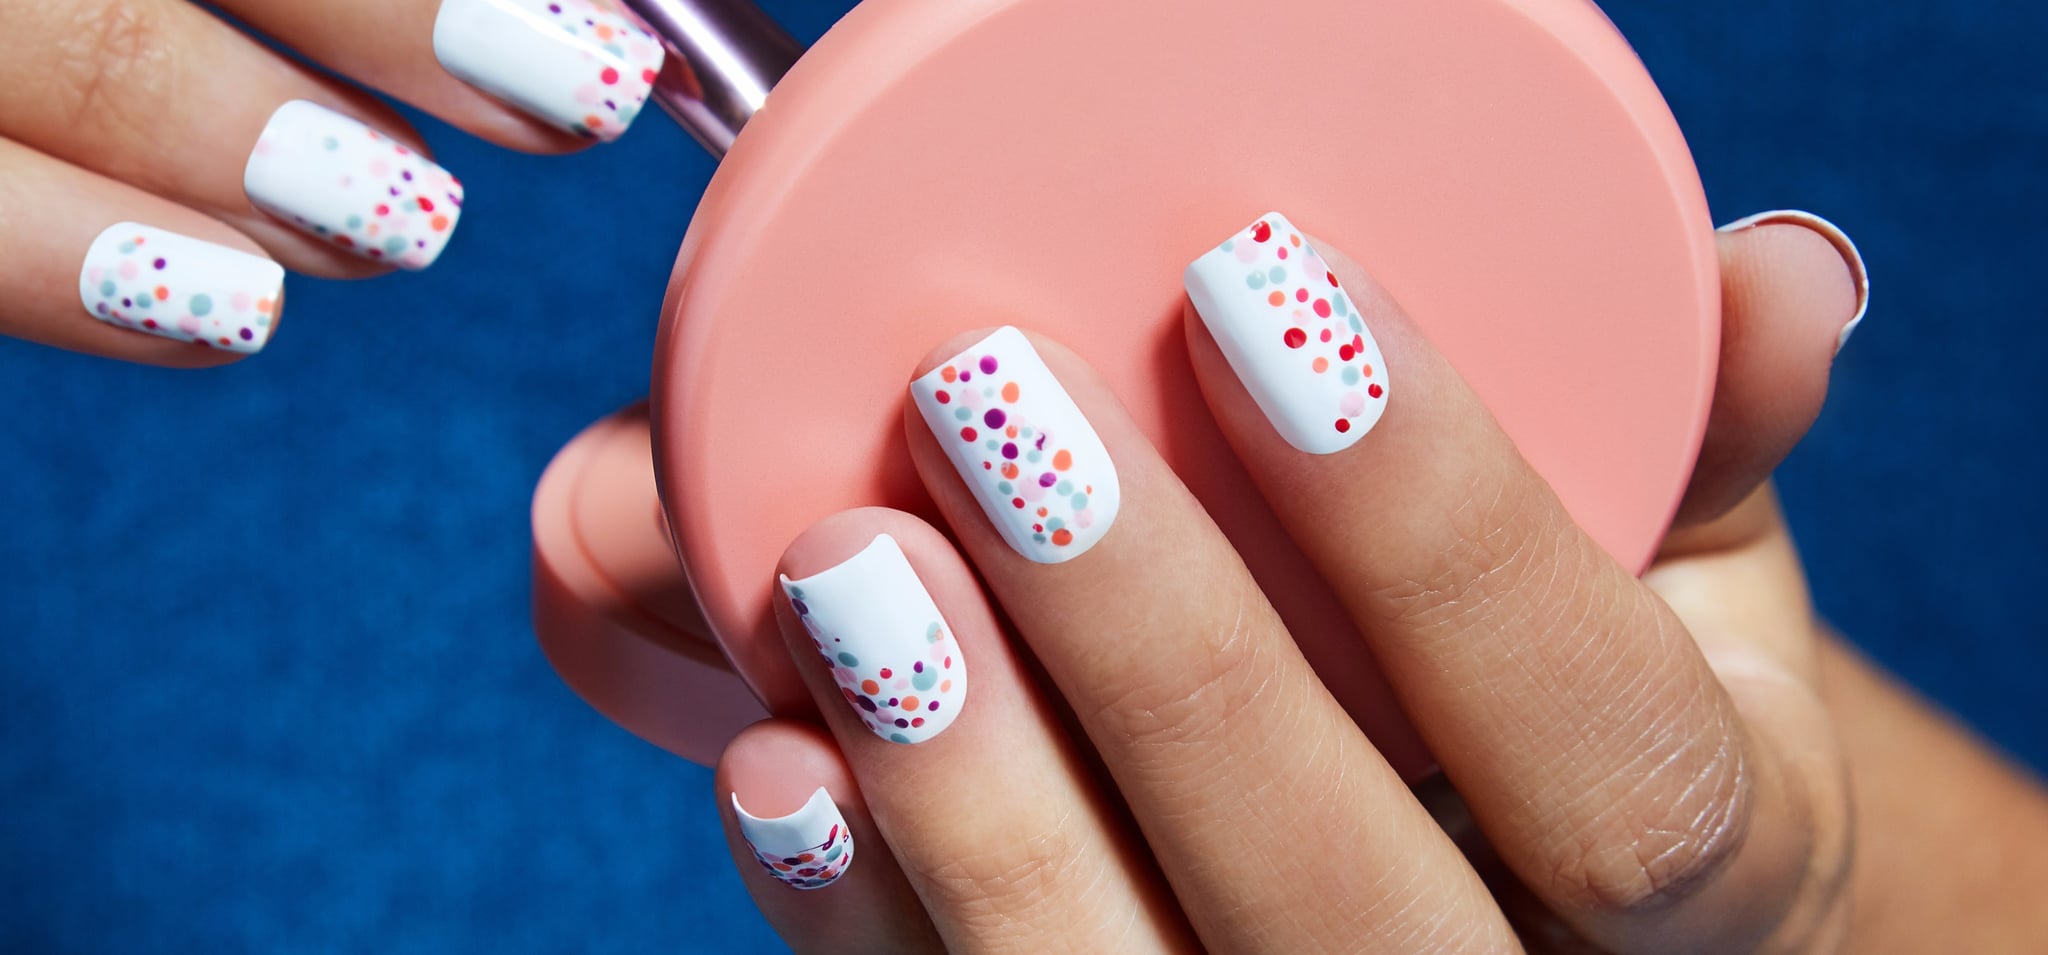 15 Simple Nail Art Designs for Lazy Girls - Step by step - K4 Craft